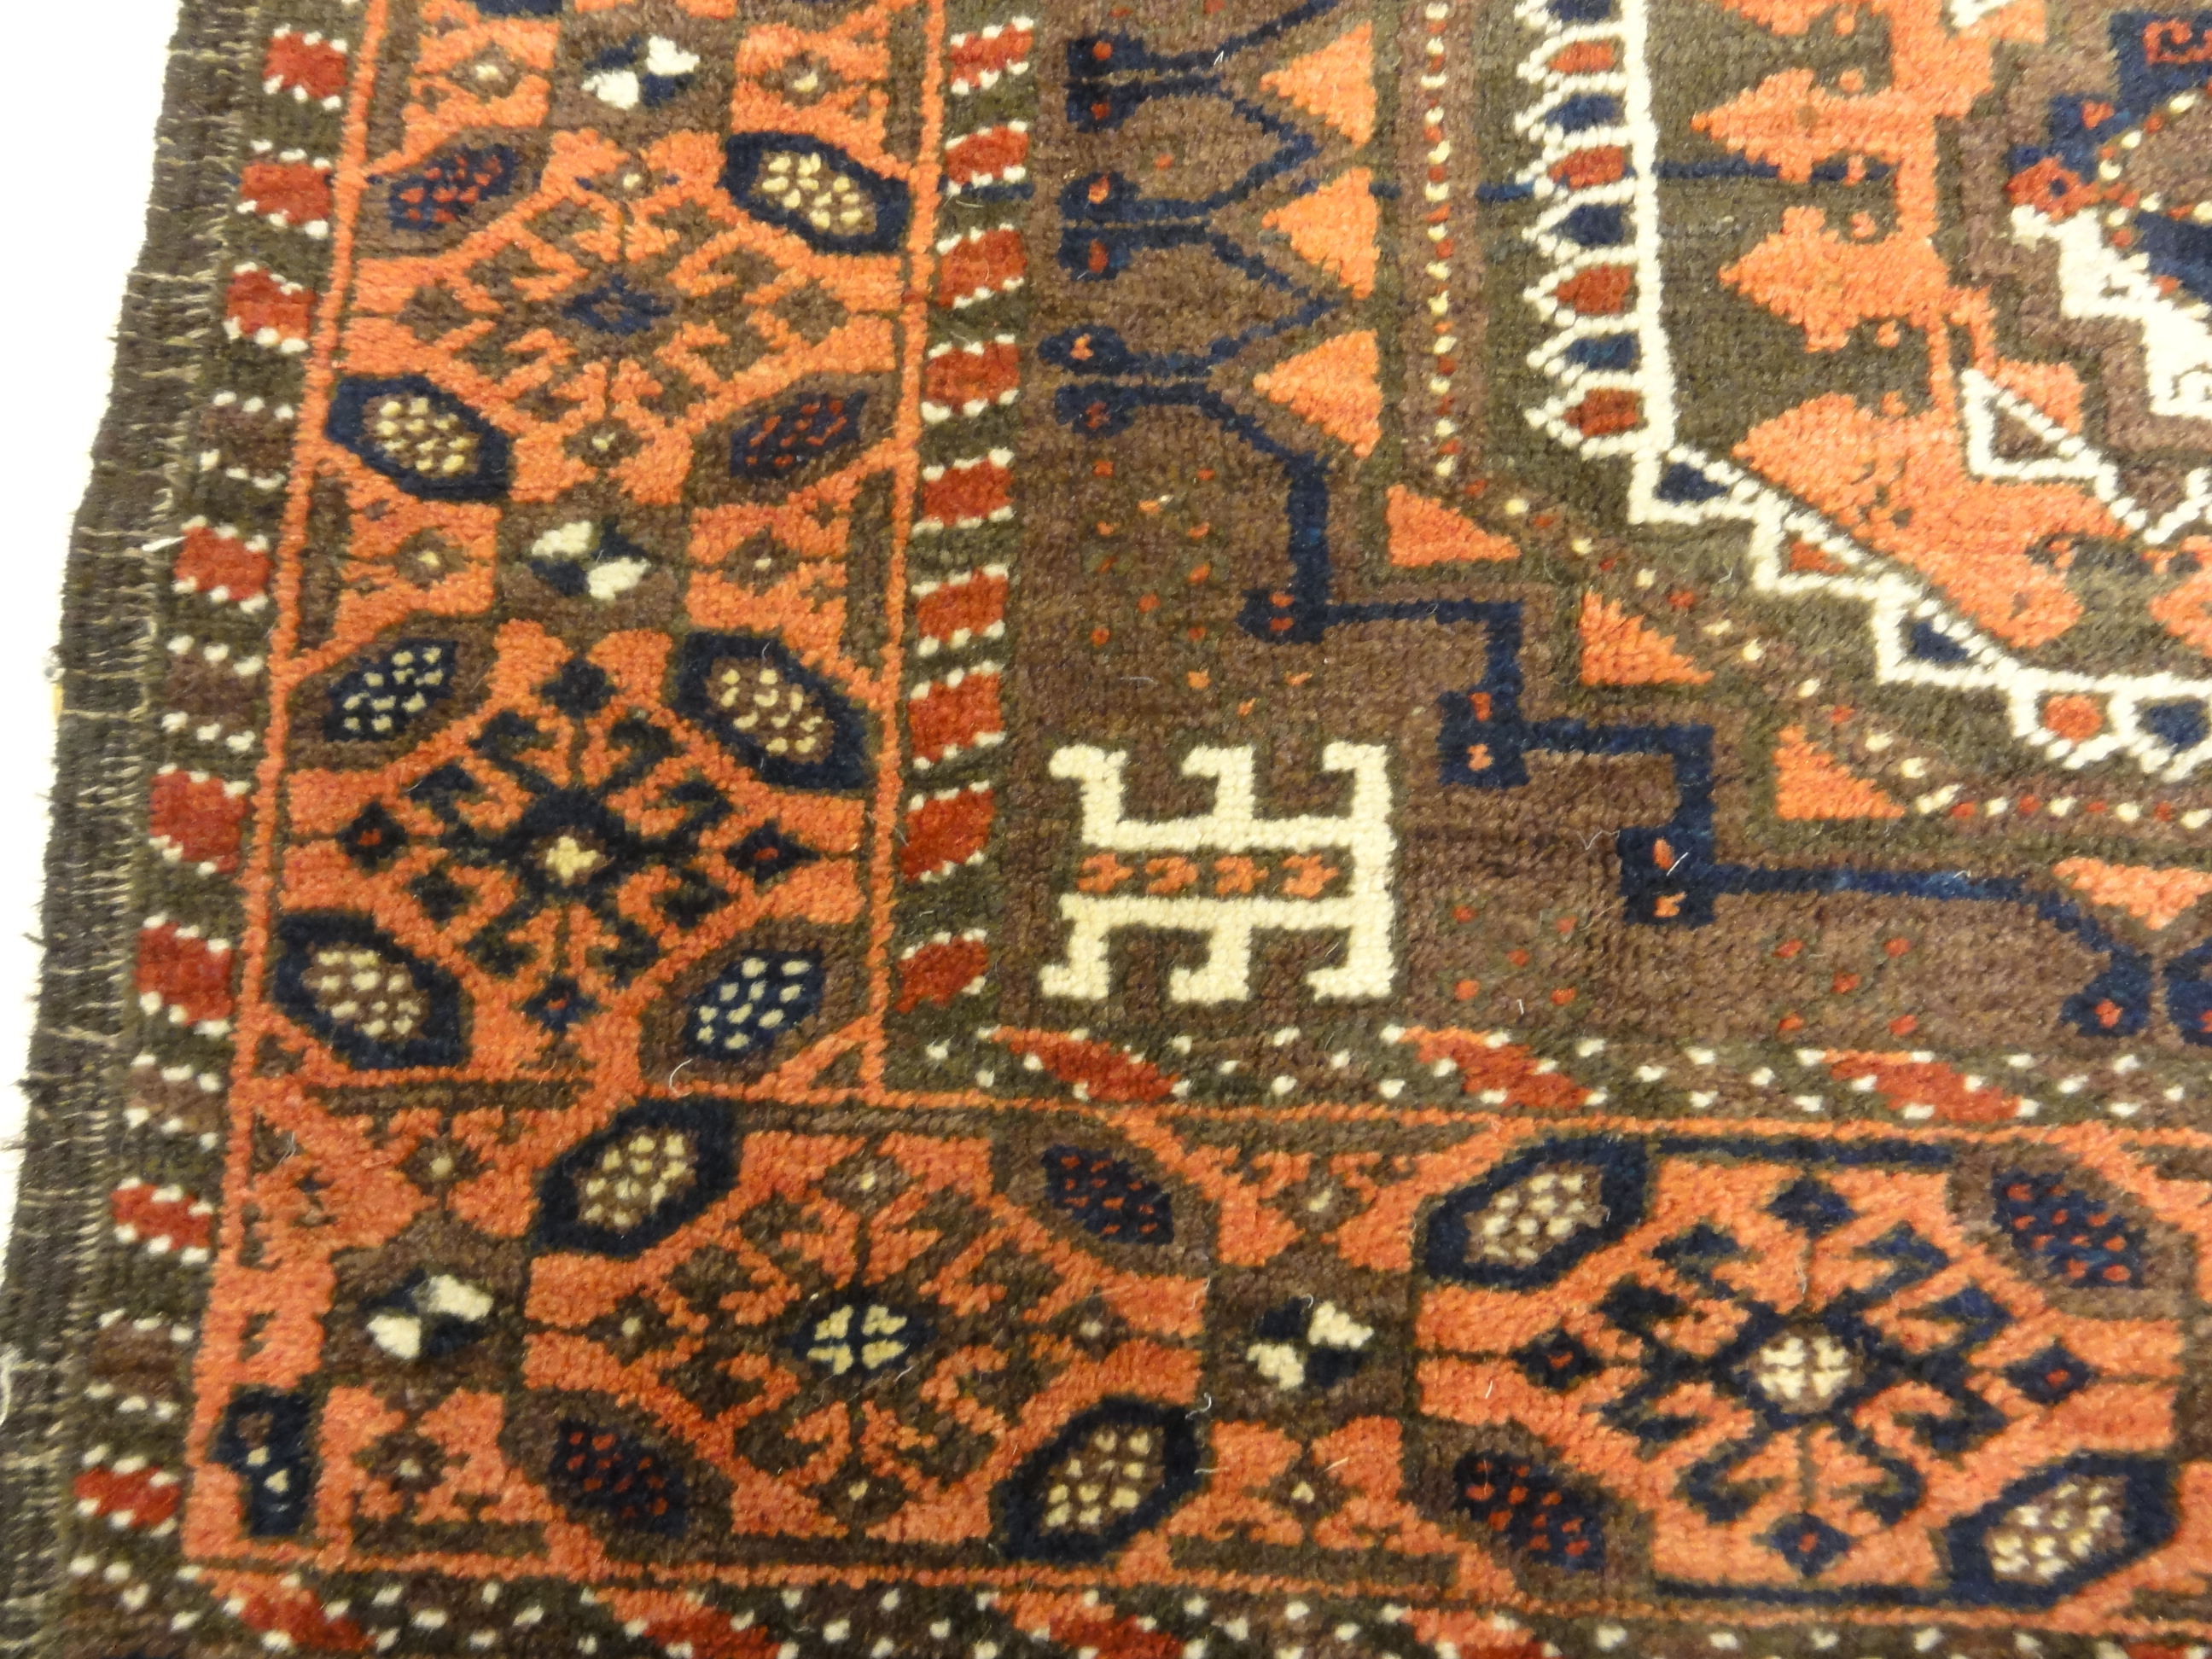 Antique Original Baluch with 3 Medallions and Unique Knotted Ends. An Afghan piece of original genuine woven carpet art sold by Santa Barbara Design Center.